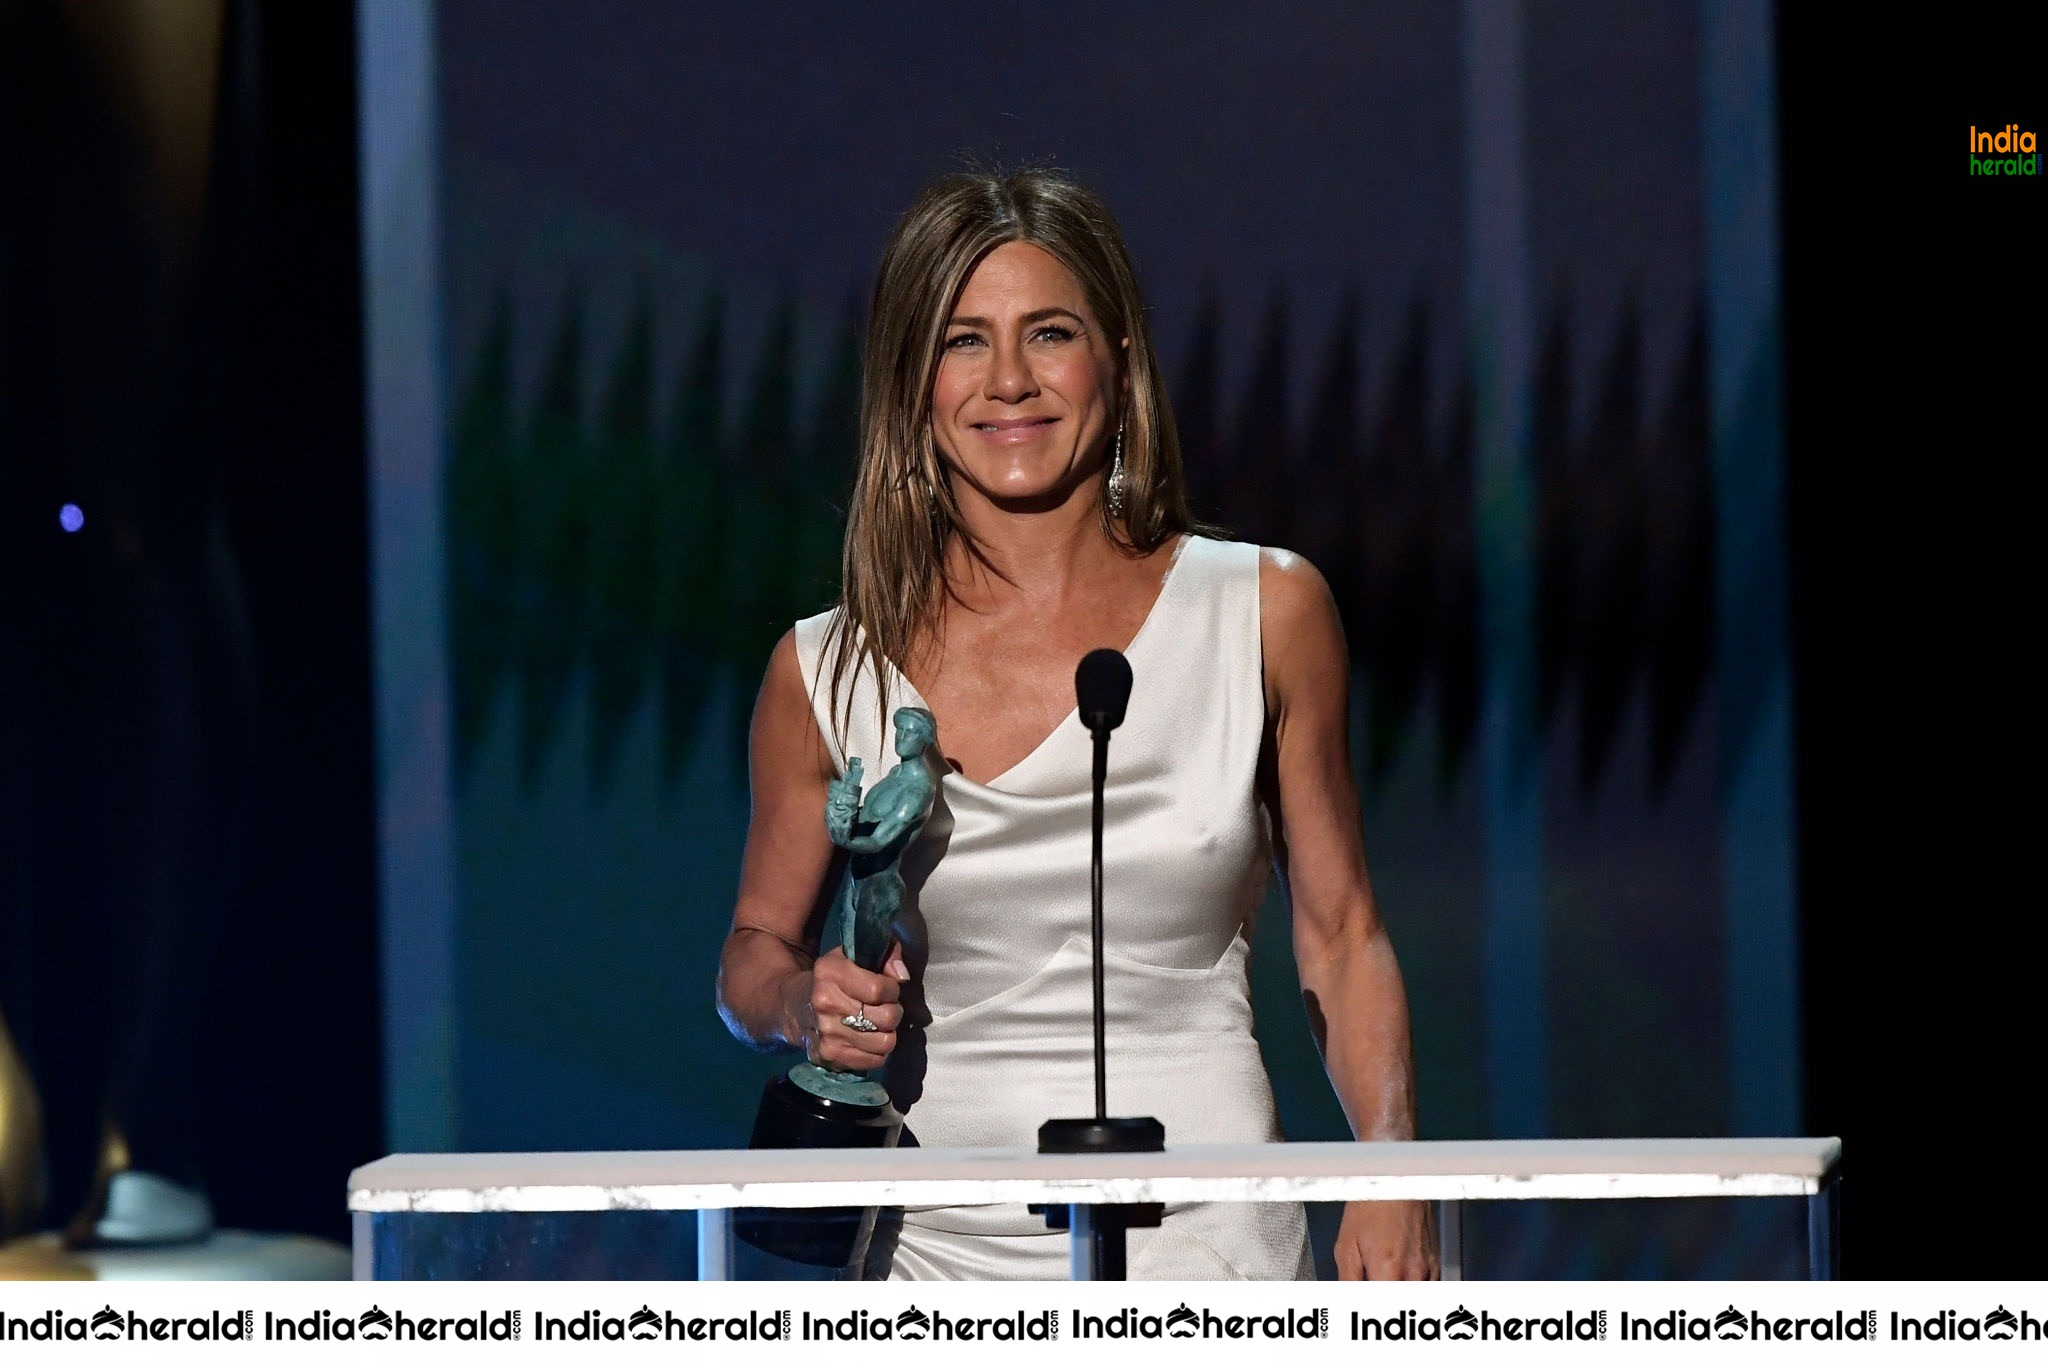 Jennifer Aniston at the 26th Annual Screen Actors Guild Awards at The Shrine Auditorium in Los Angeles Set 2